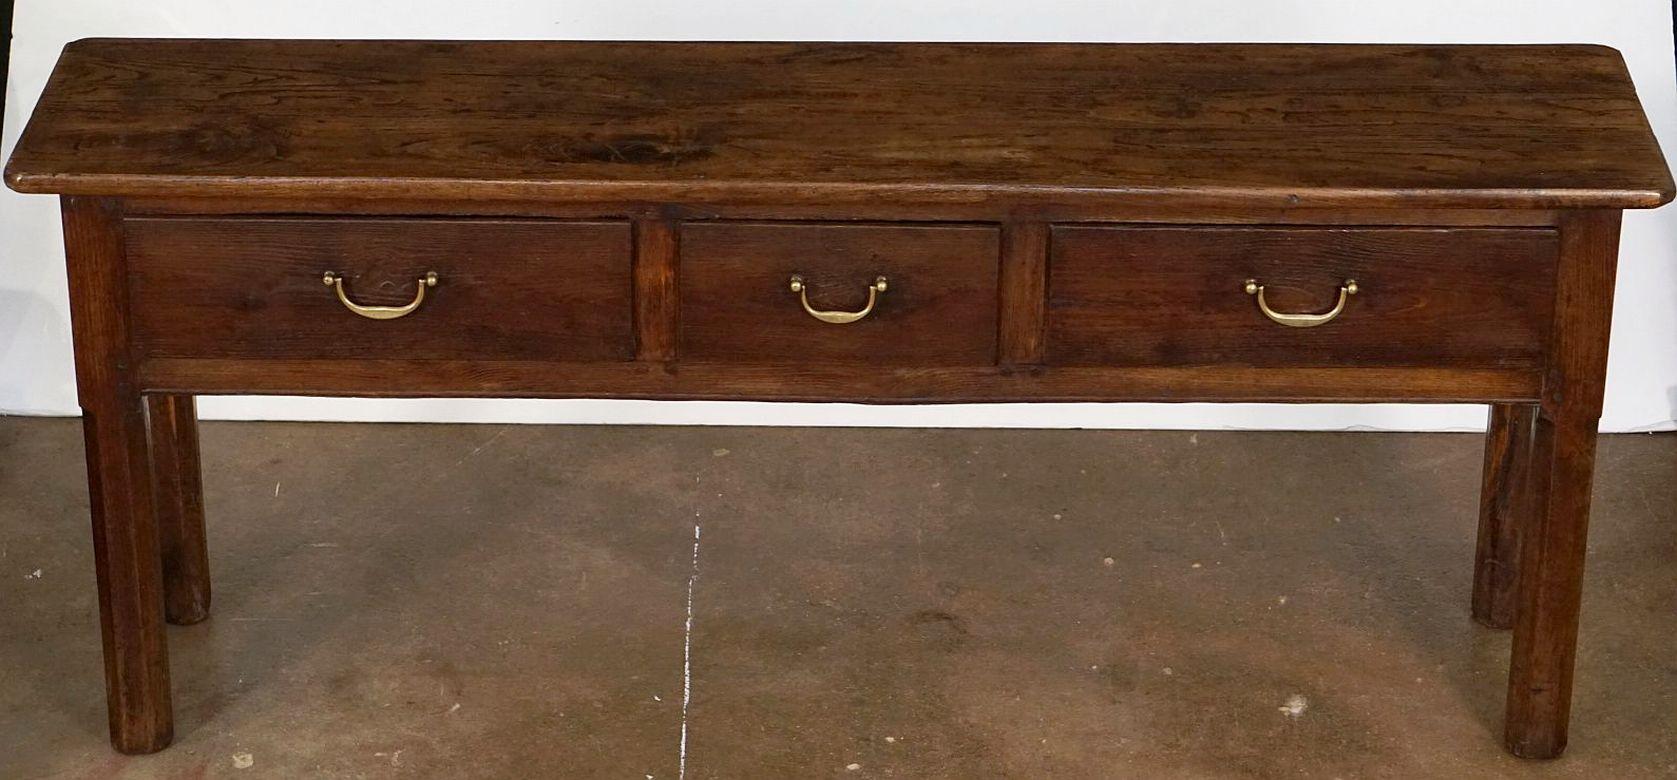 20th Century French Console Server or Sideboard of Chestnut